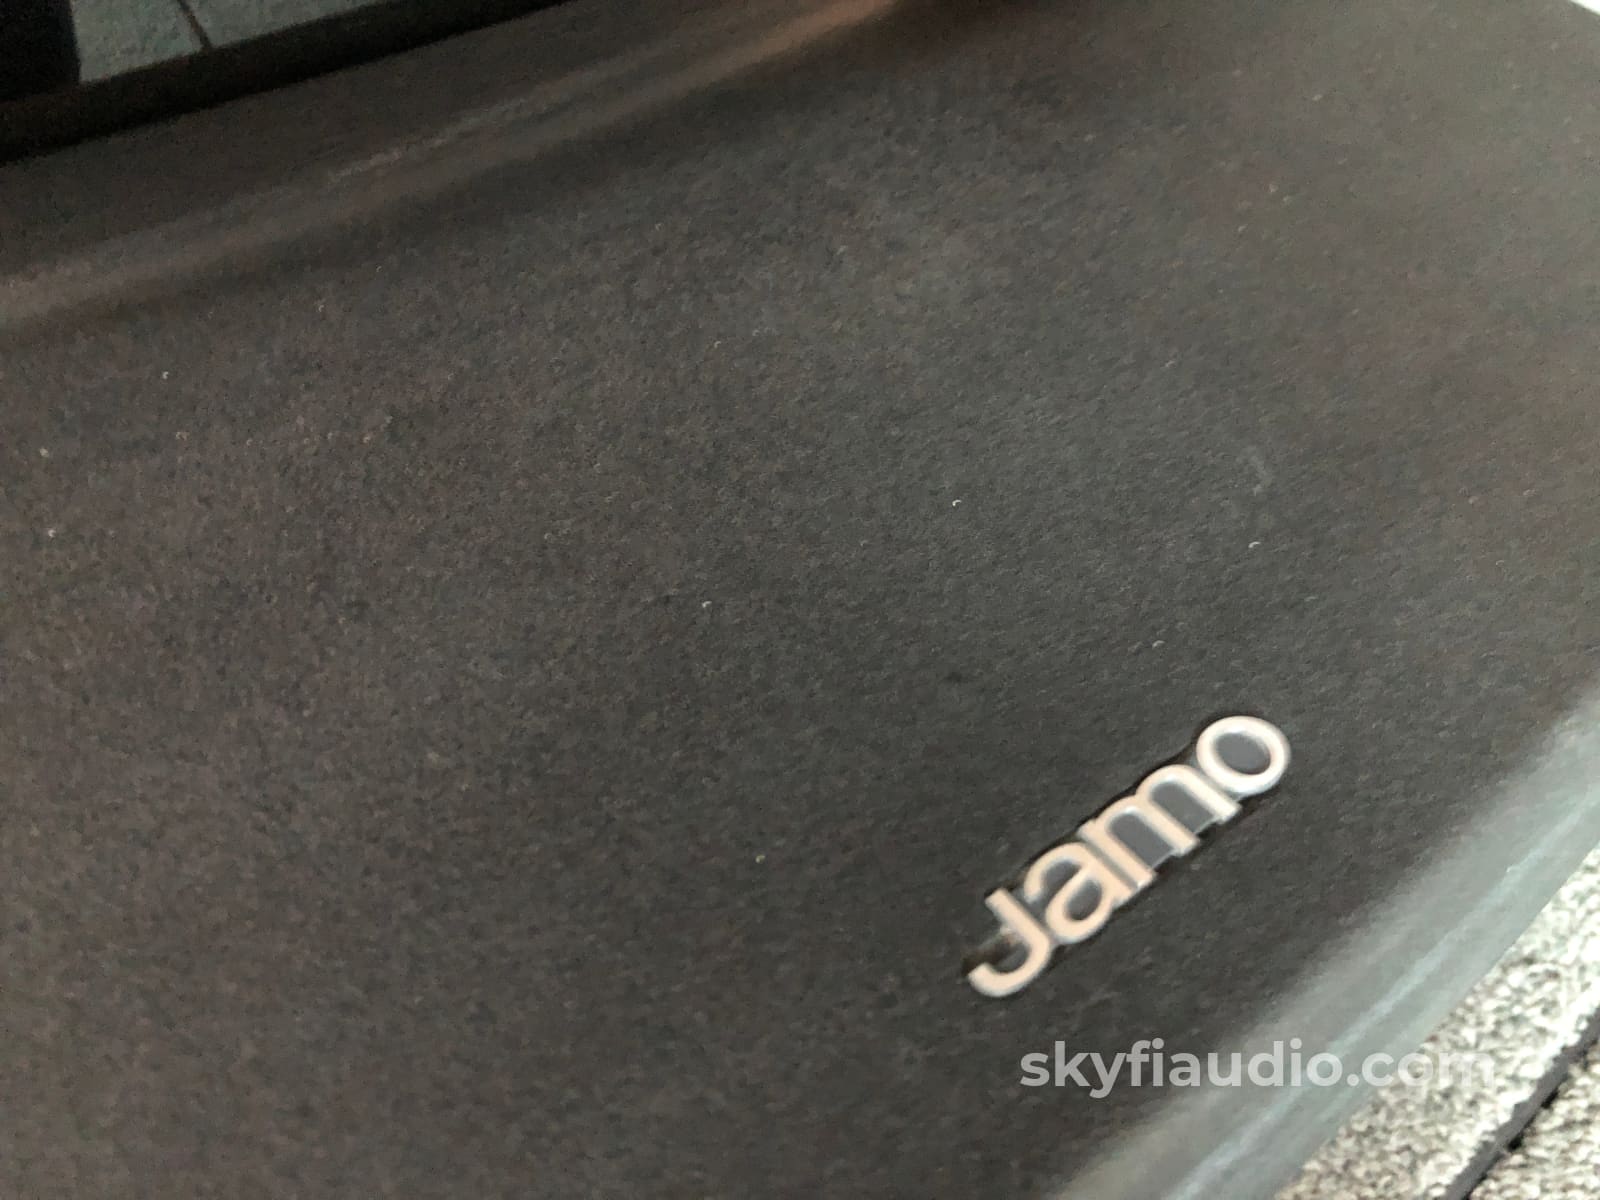 Jamo R909 Reference Speakers In Gloss Black - Made Denmark Open Baffle Design With Dual 15 Woofers